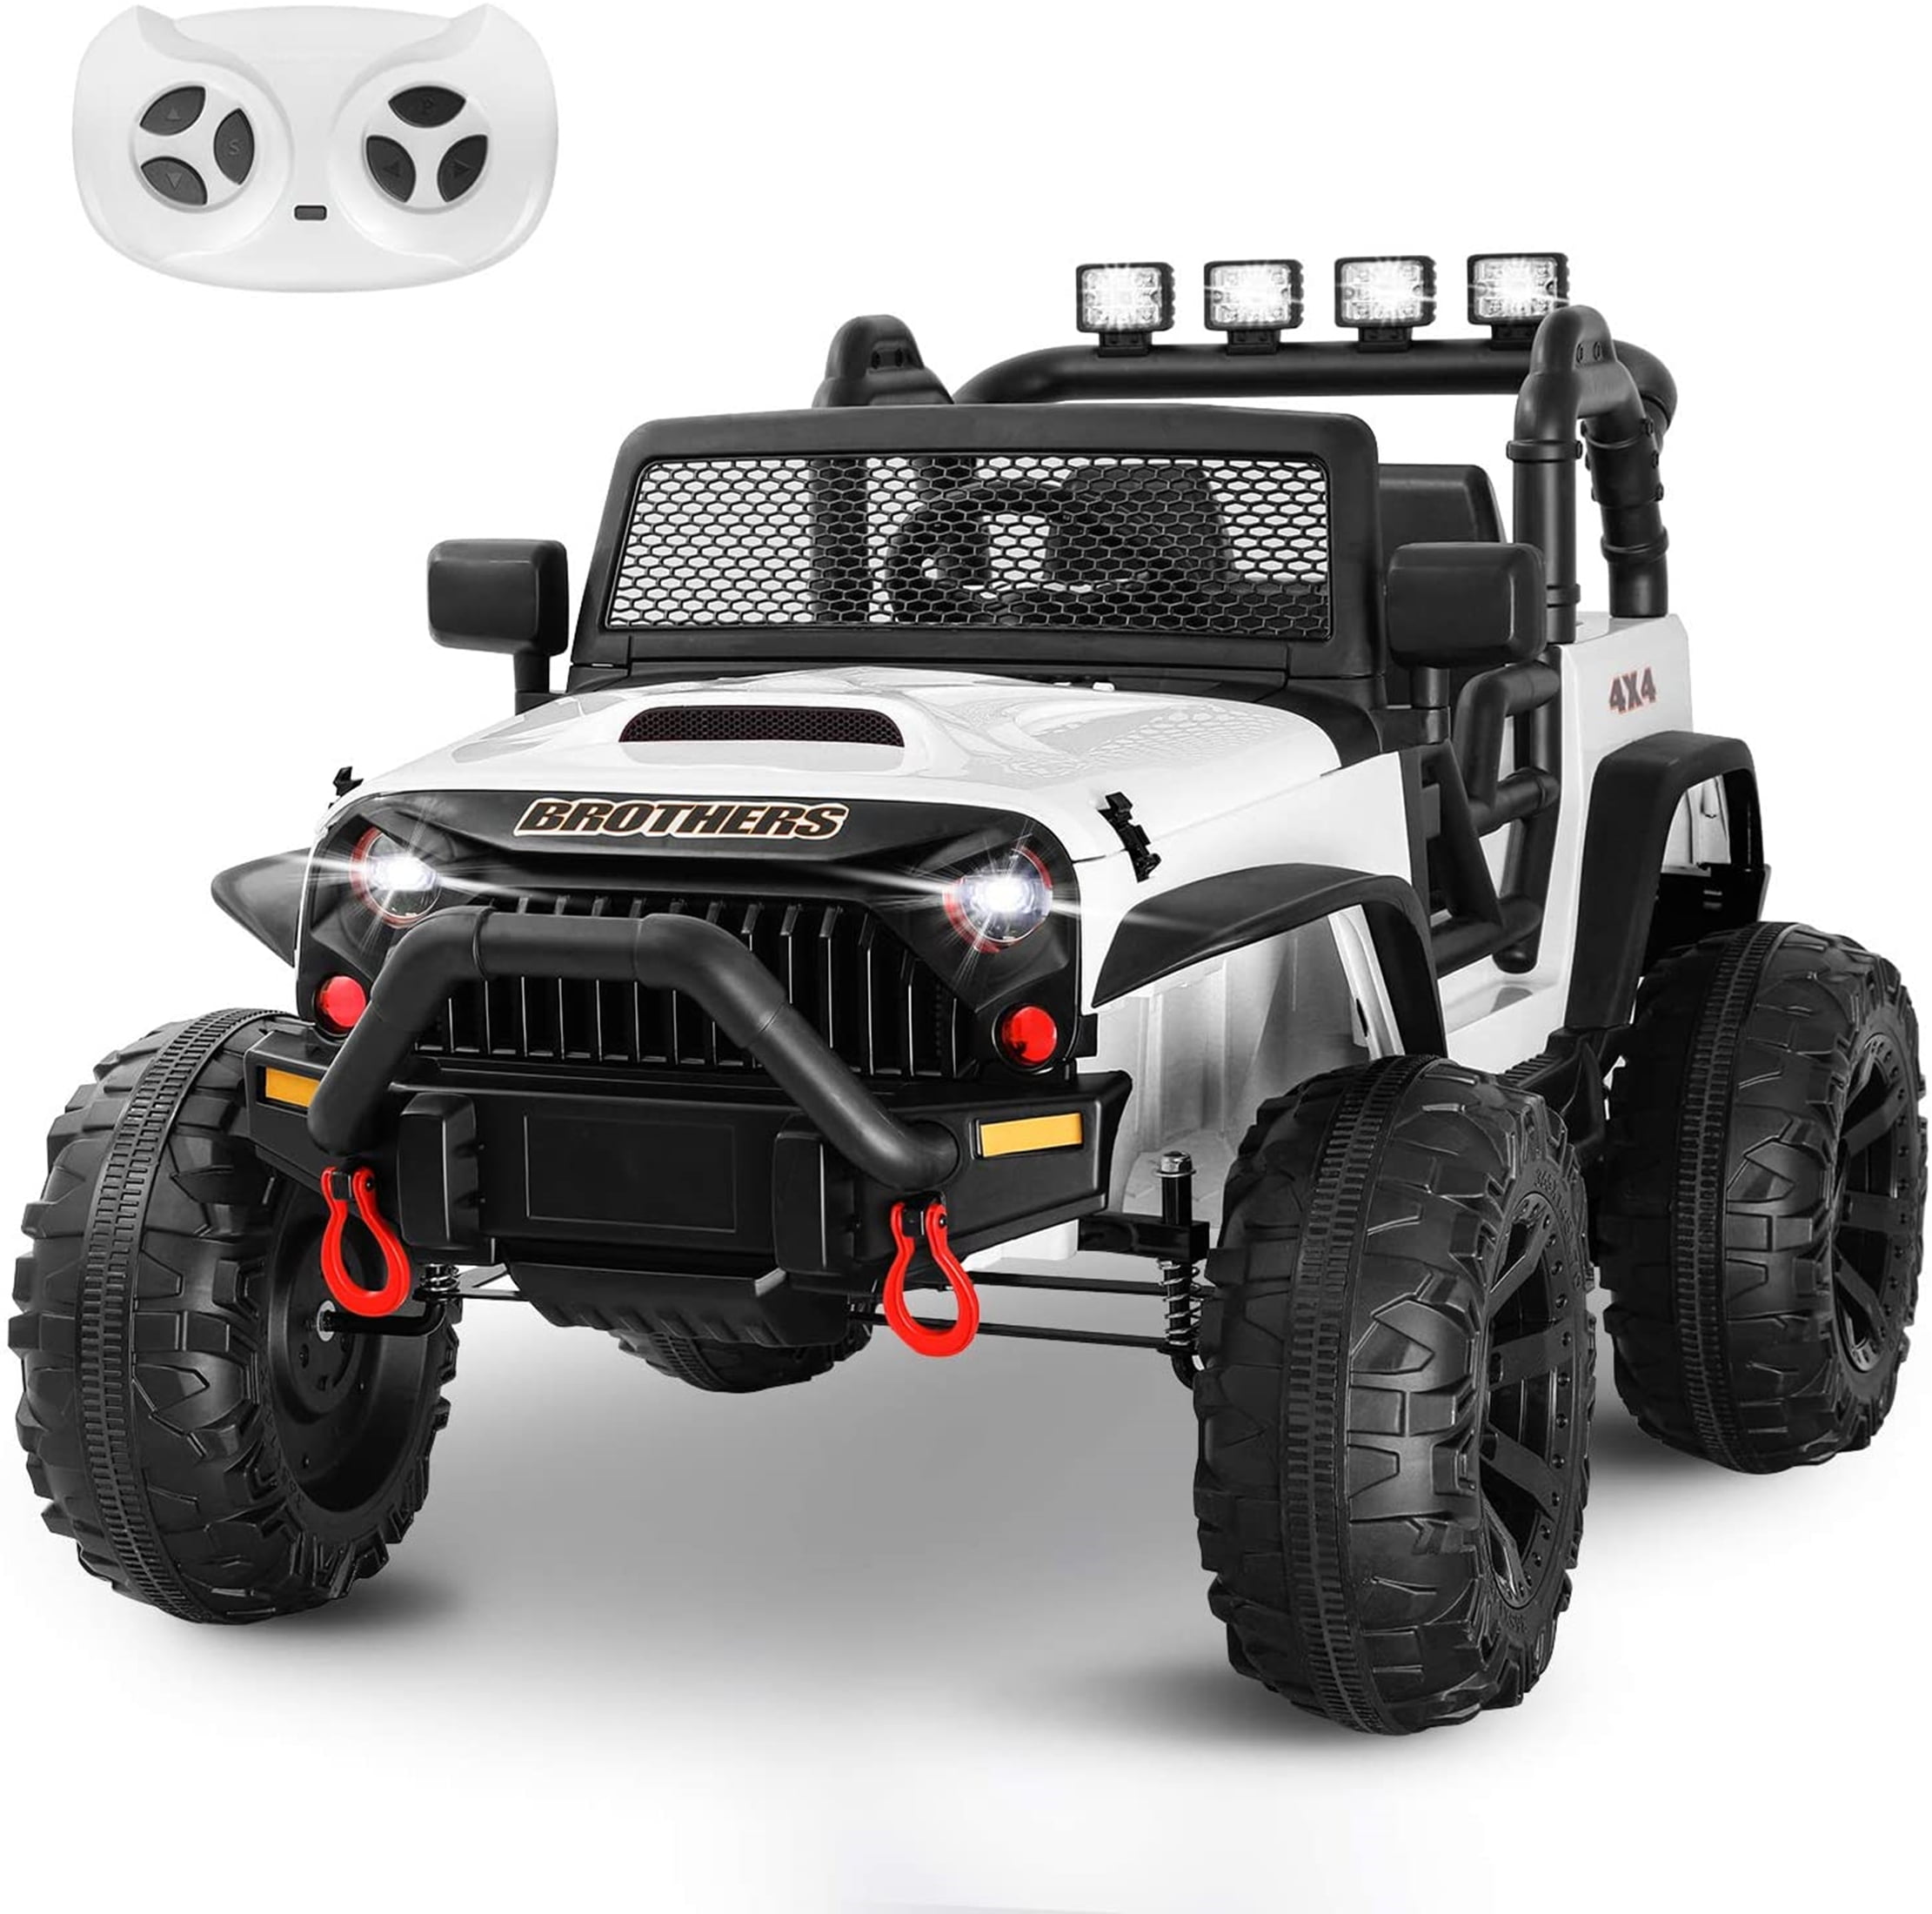 HOMFY Kids Ride on Truck Toy 12V Electric Vehicles Motorized Toddler Realistic Off-Road UTV Car with 2.4G Parental Remote Control Orange LED Light MP3/Bluetooth Player 